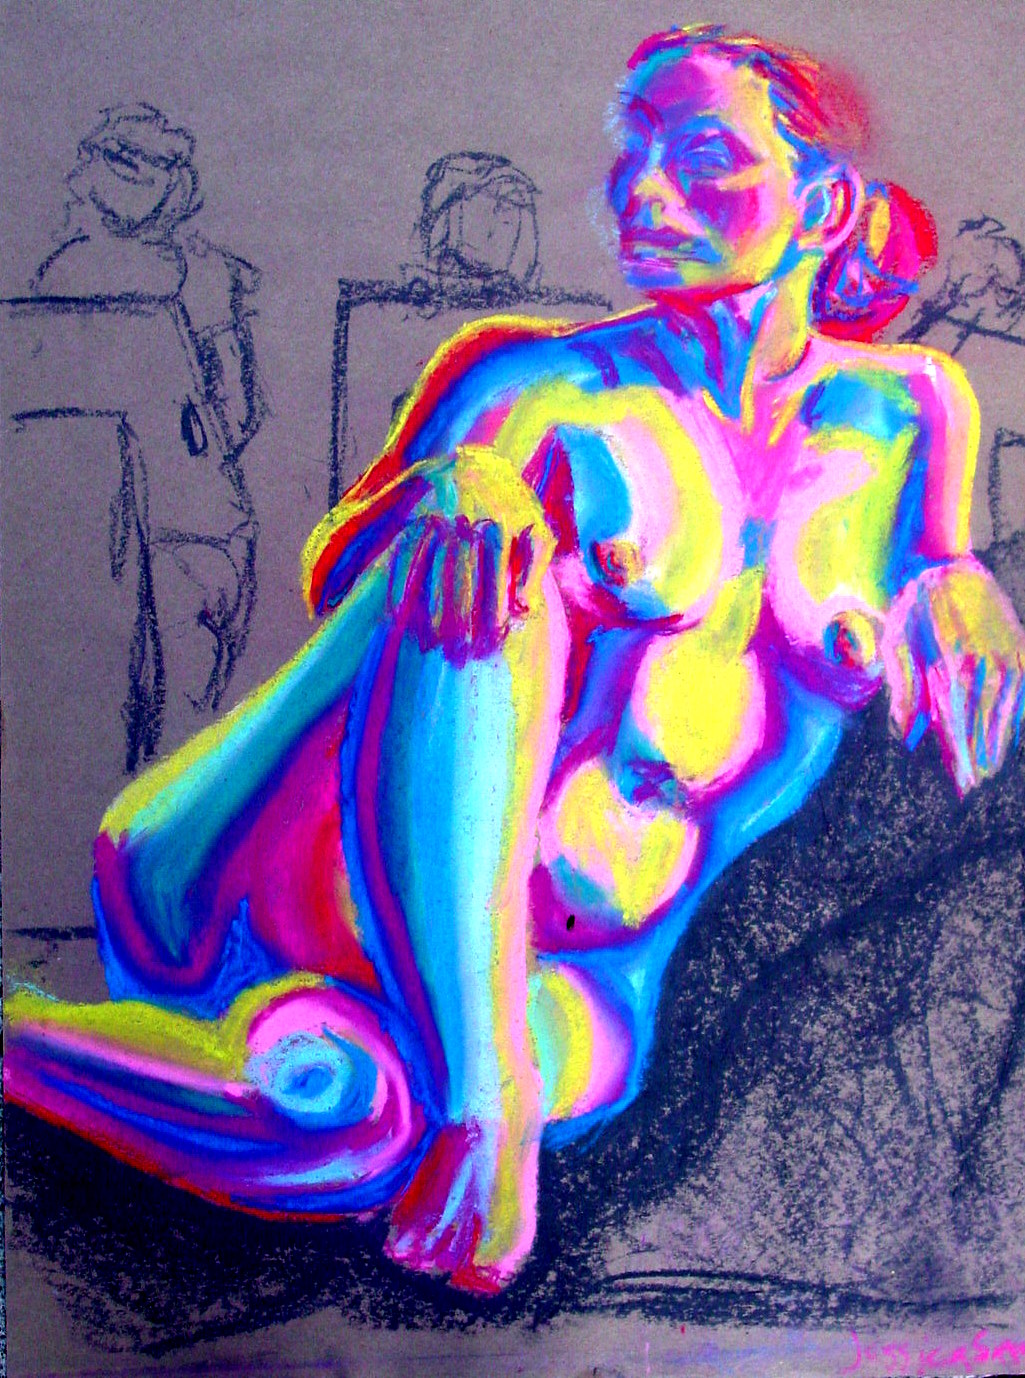 Life Drawing Portrait, soft pastels on brown paper, 18x24 inches, Jessica Siemens 2008